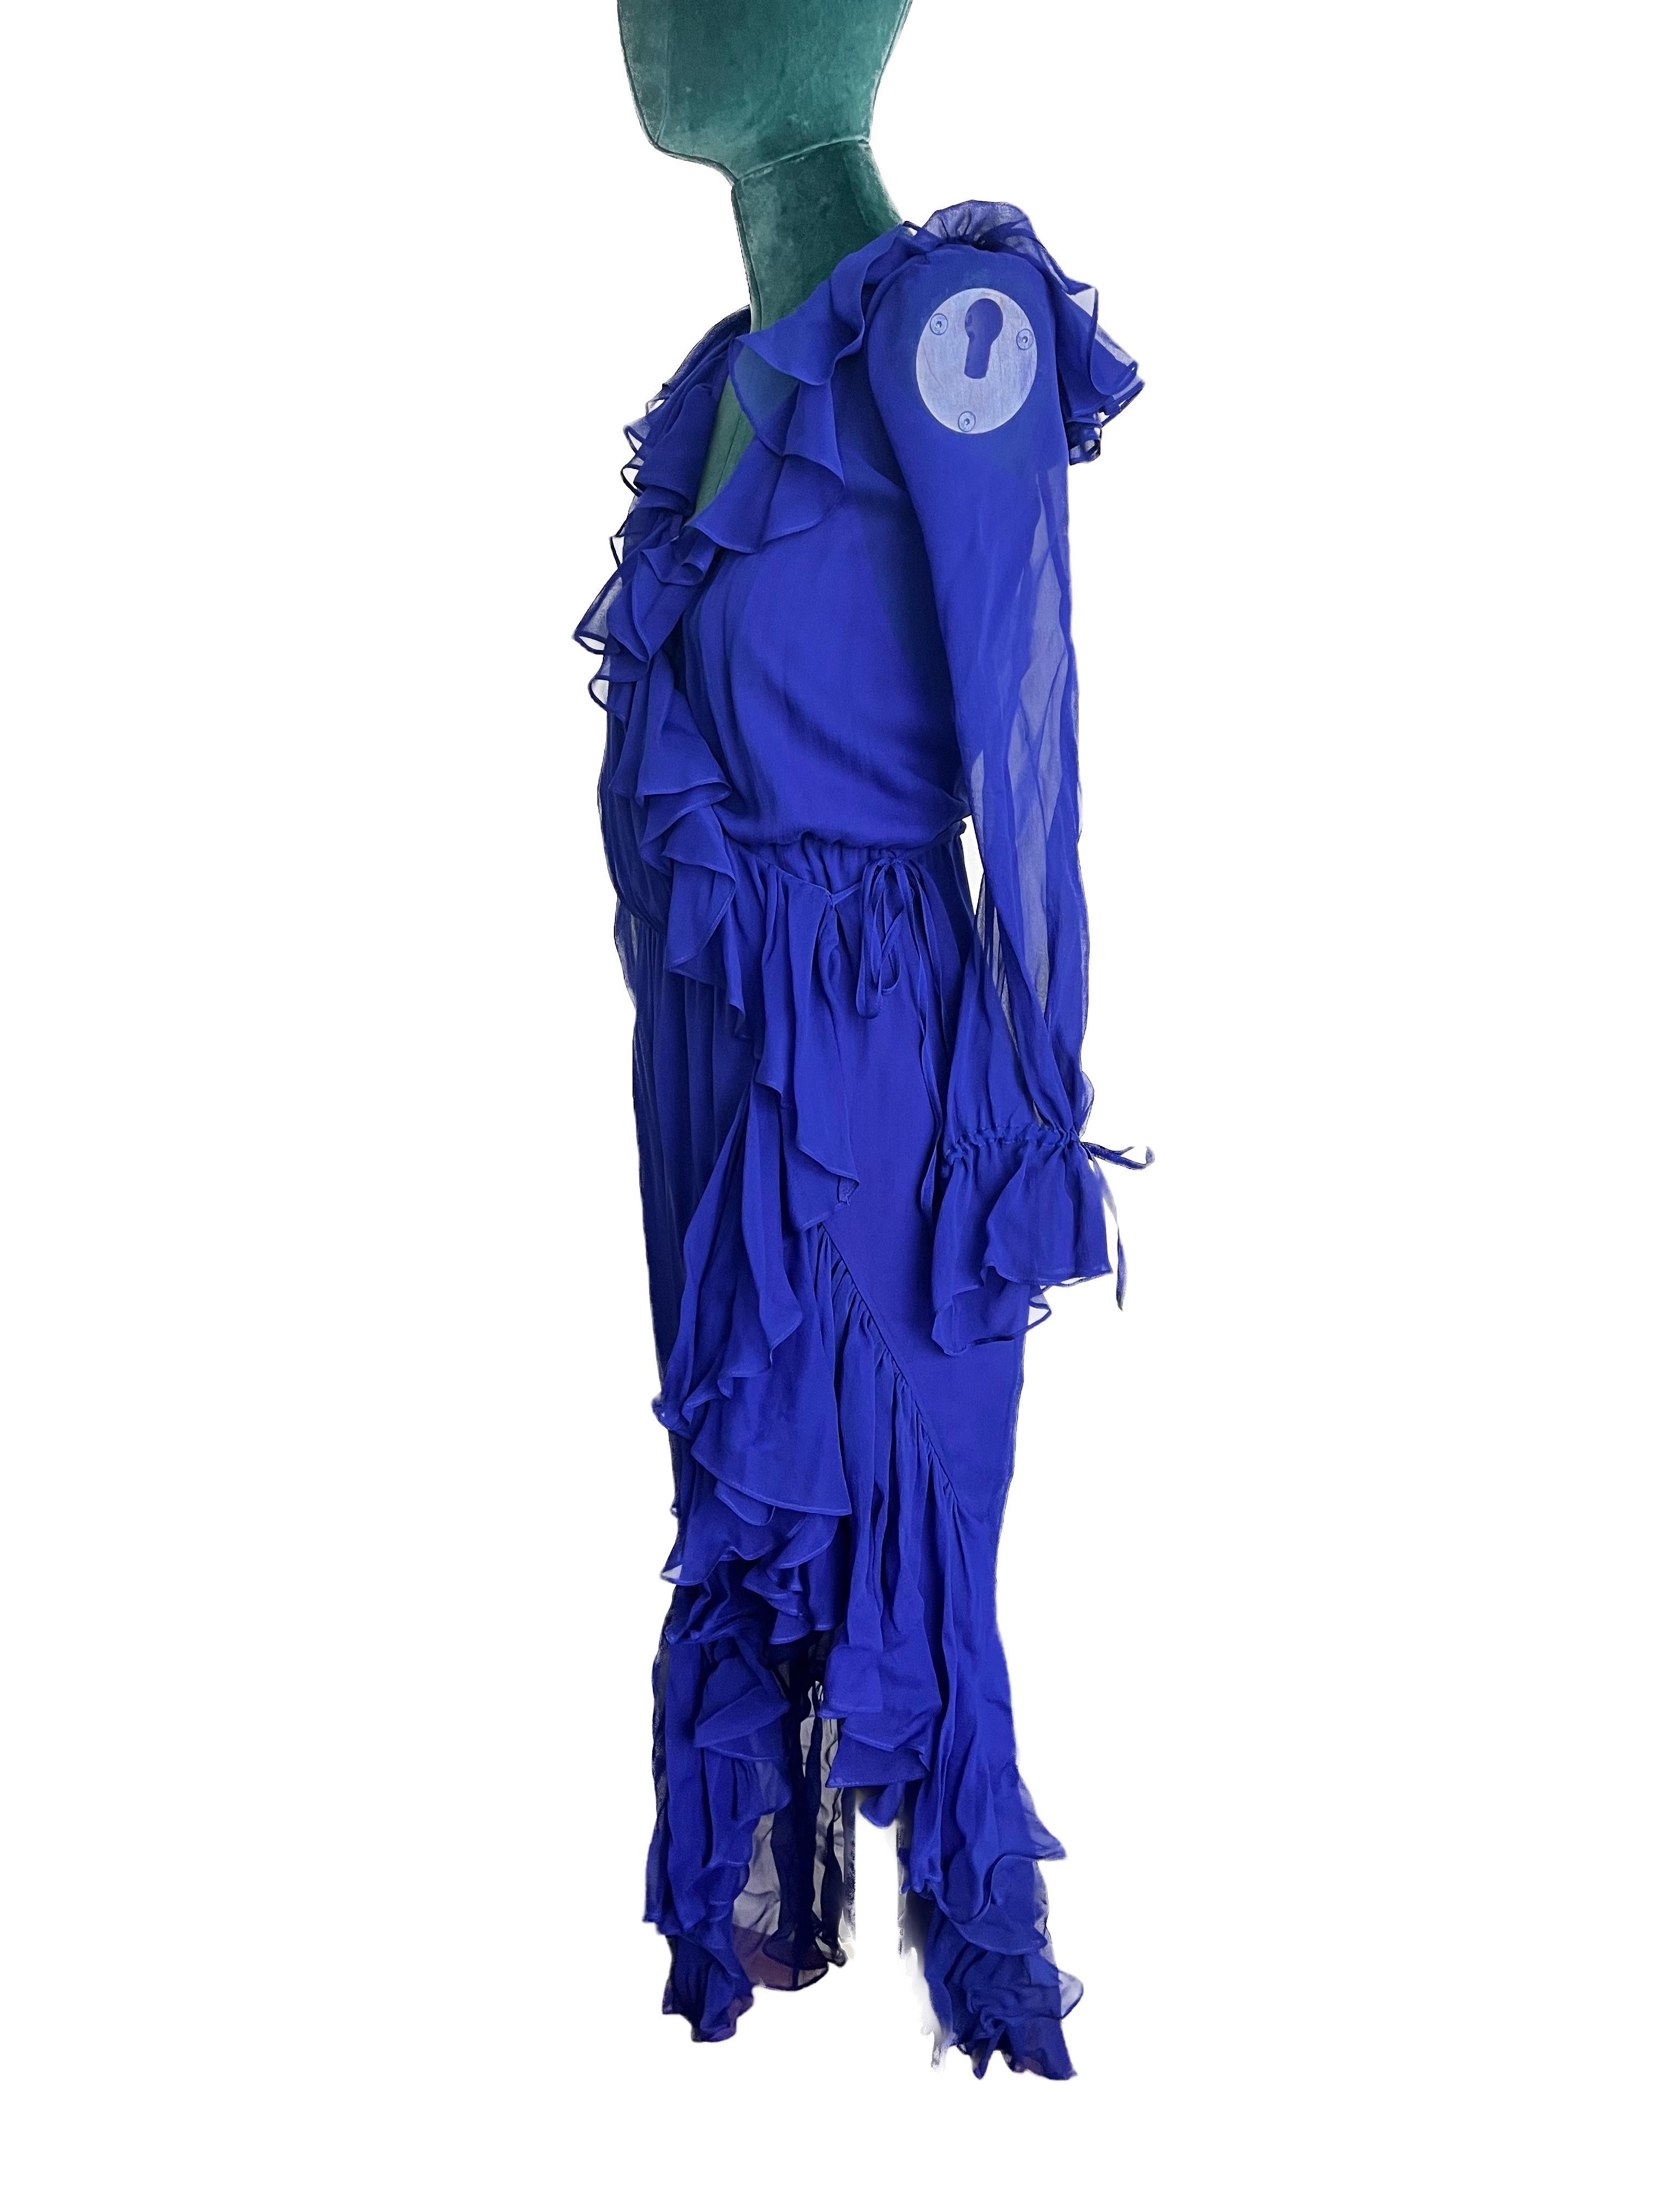 Saint Laurent Blue Chiffon Wrap Dress with Ruffle Detail

Elevate your style with the ethereal charm of the Saint Laurent Blue Chiffon Wrap Dress featuring exquisite frugal detailing. This captivating piece seamlessly blends timeless elegance with